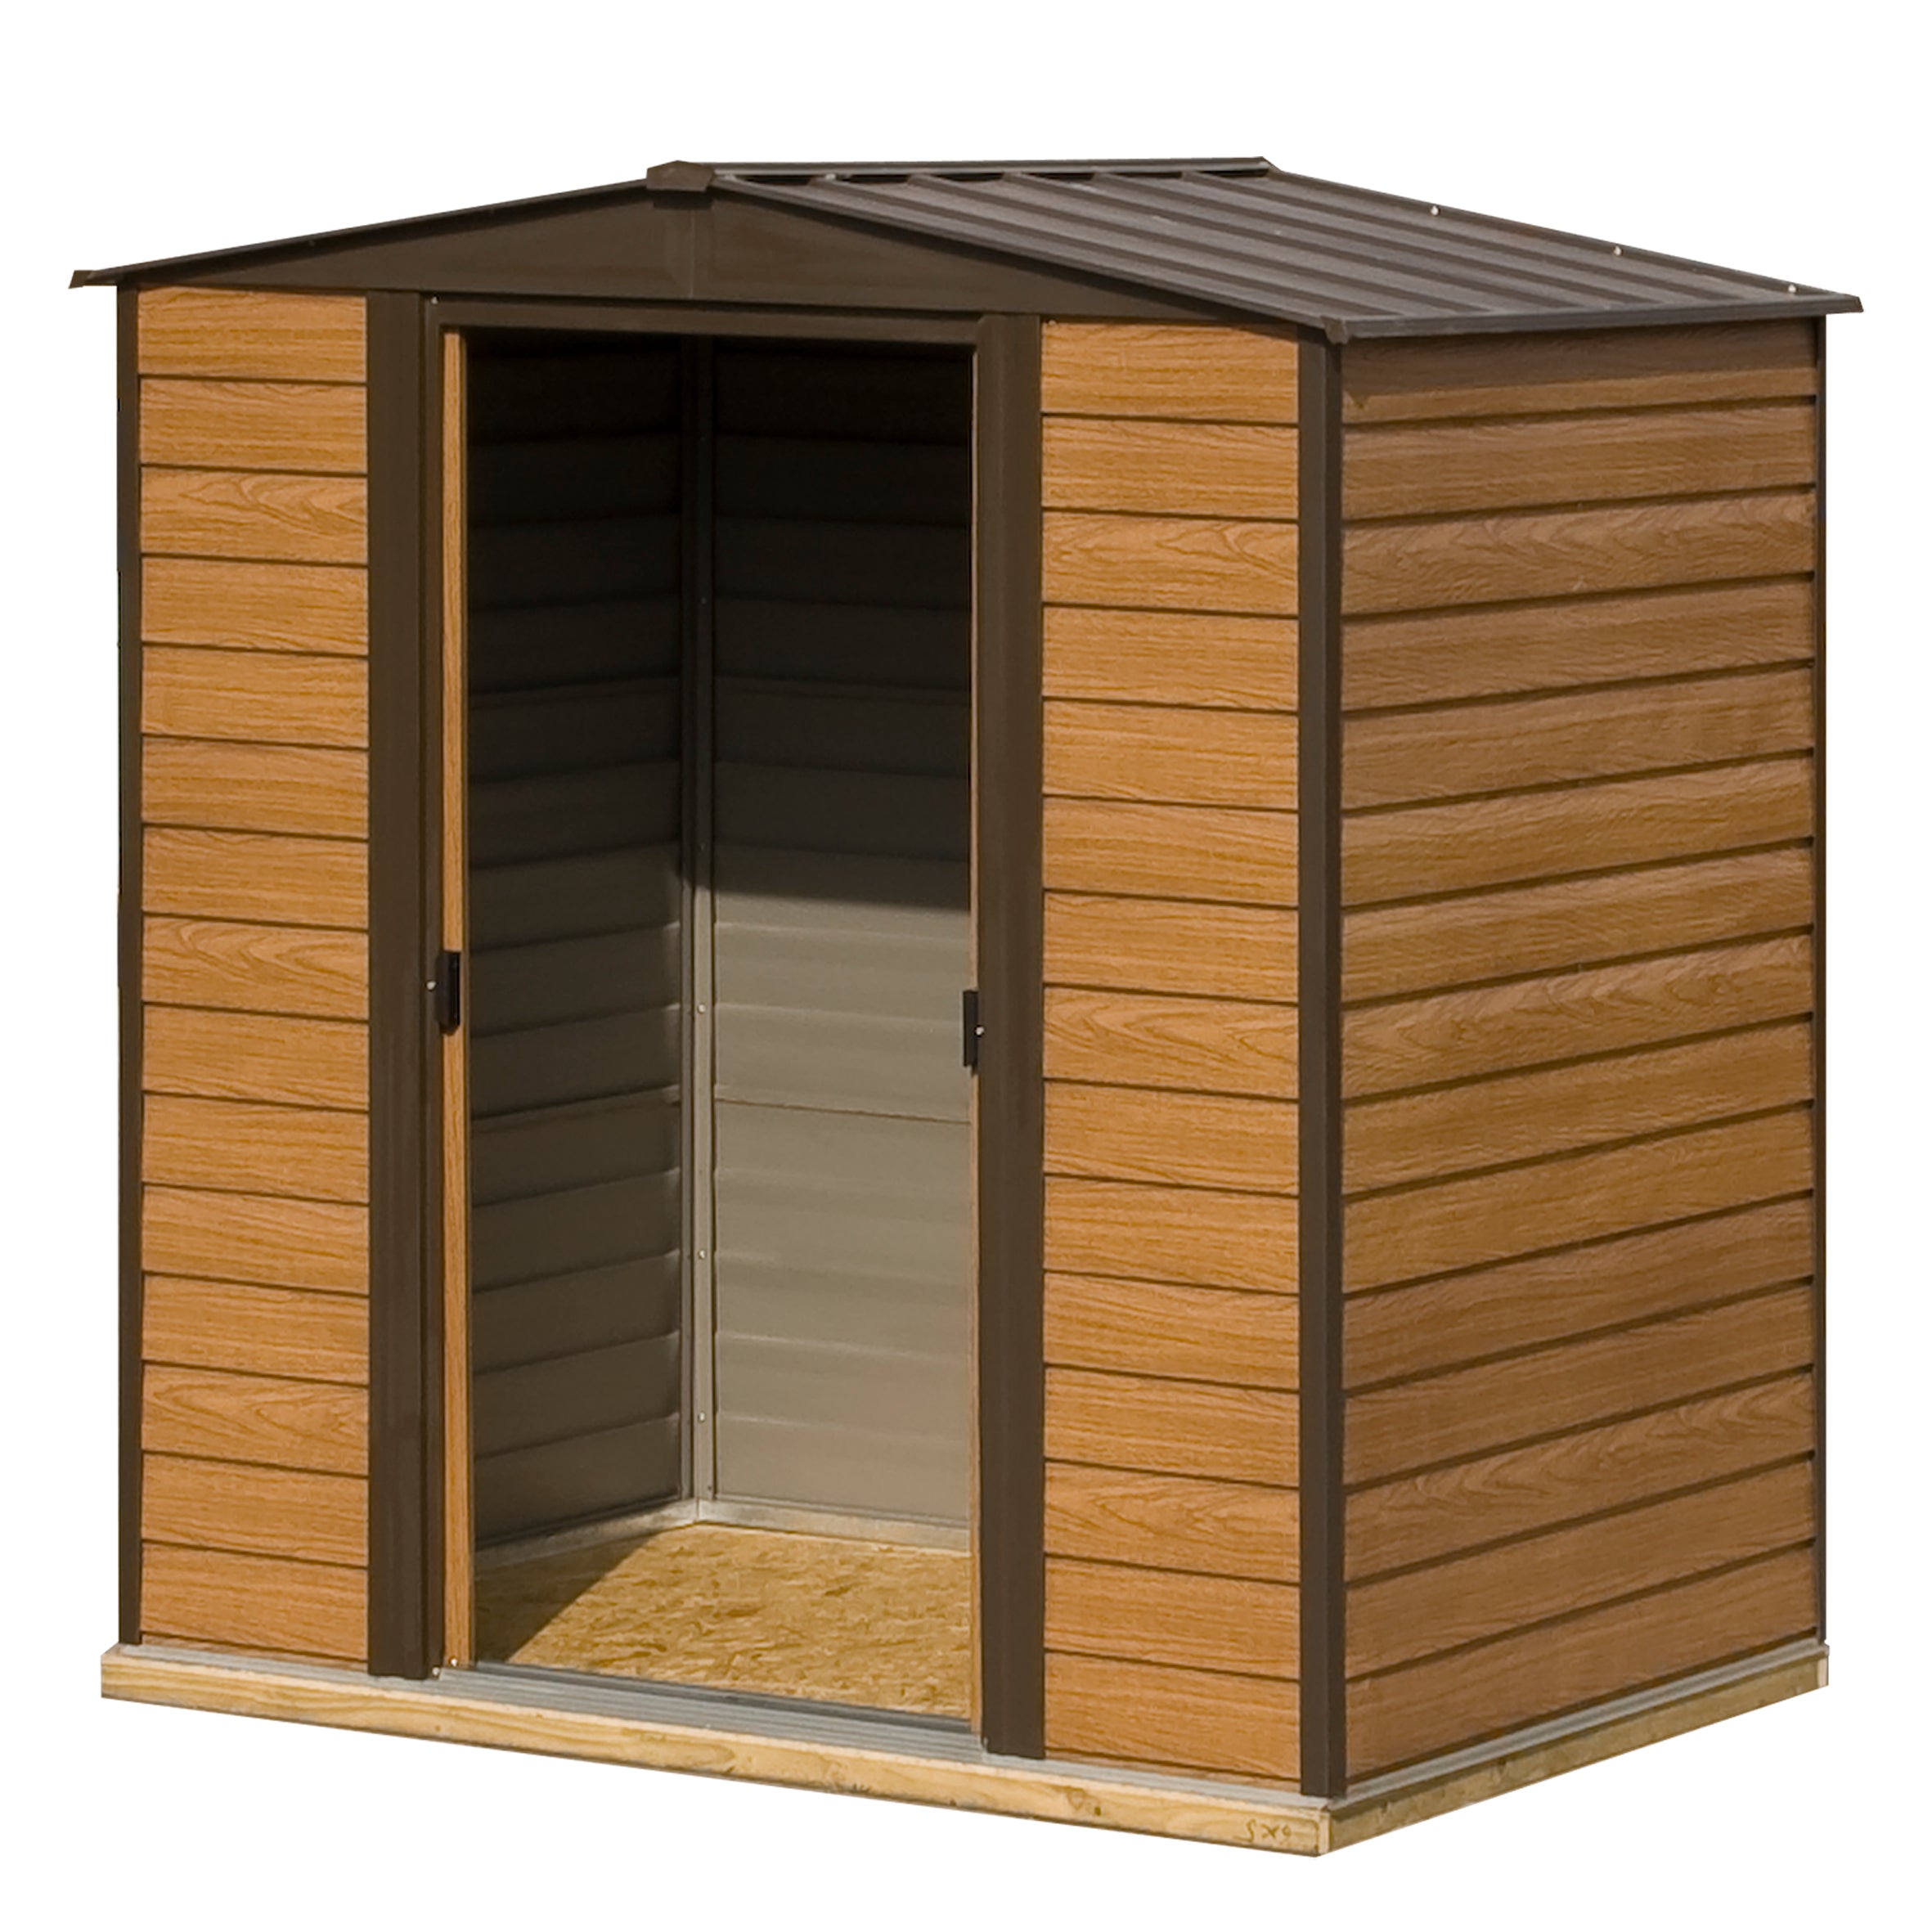 Rowlinson 6x5 Woodvale Metal Apex Shed With Floor